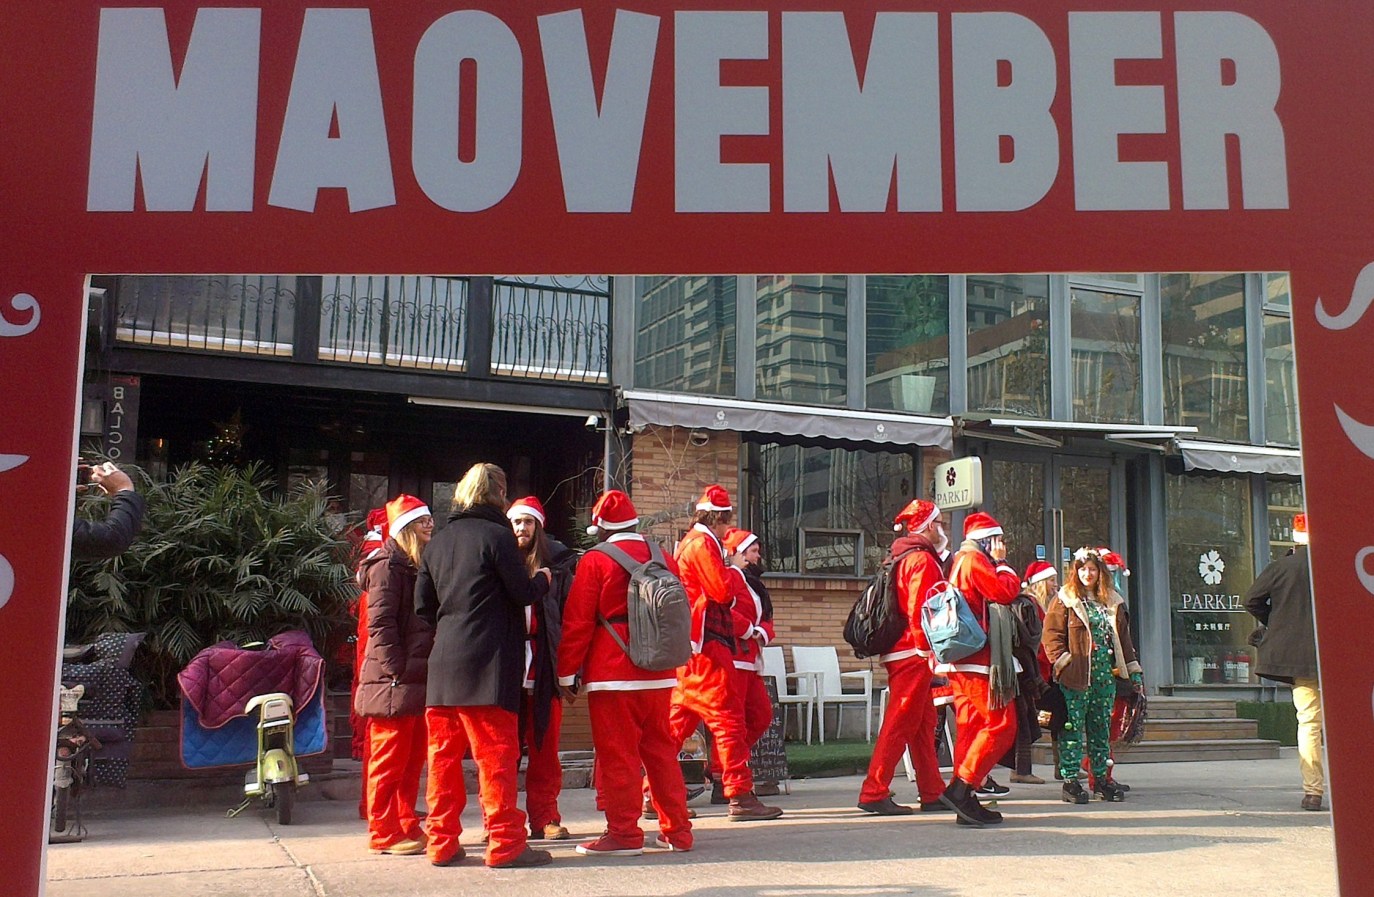 Festive Cheer For a Good Cause: SantaCon and Maovember Team Up for Fundraising Fun